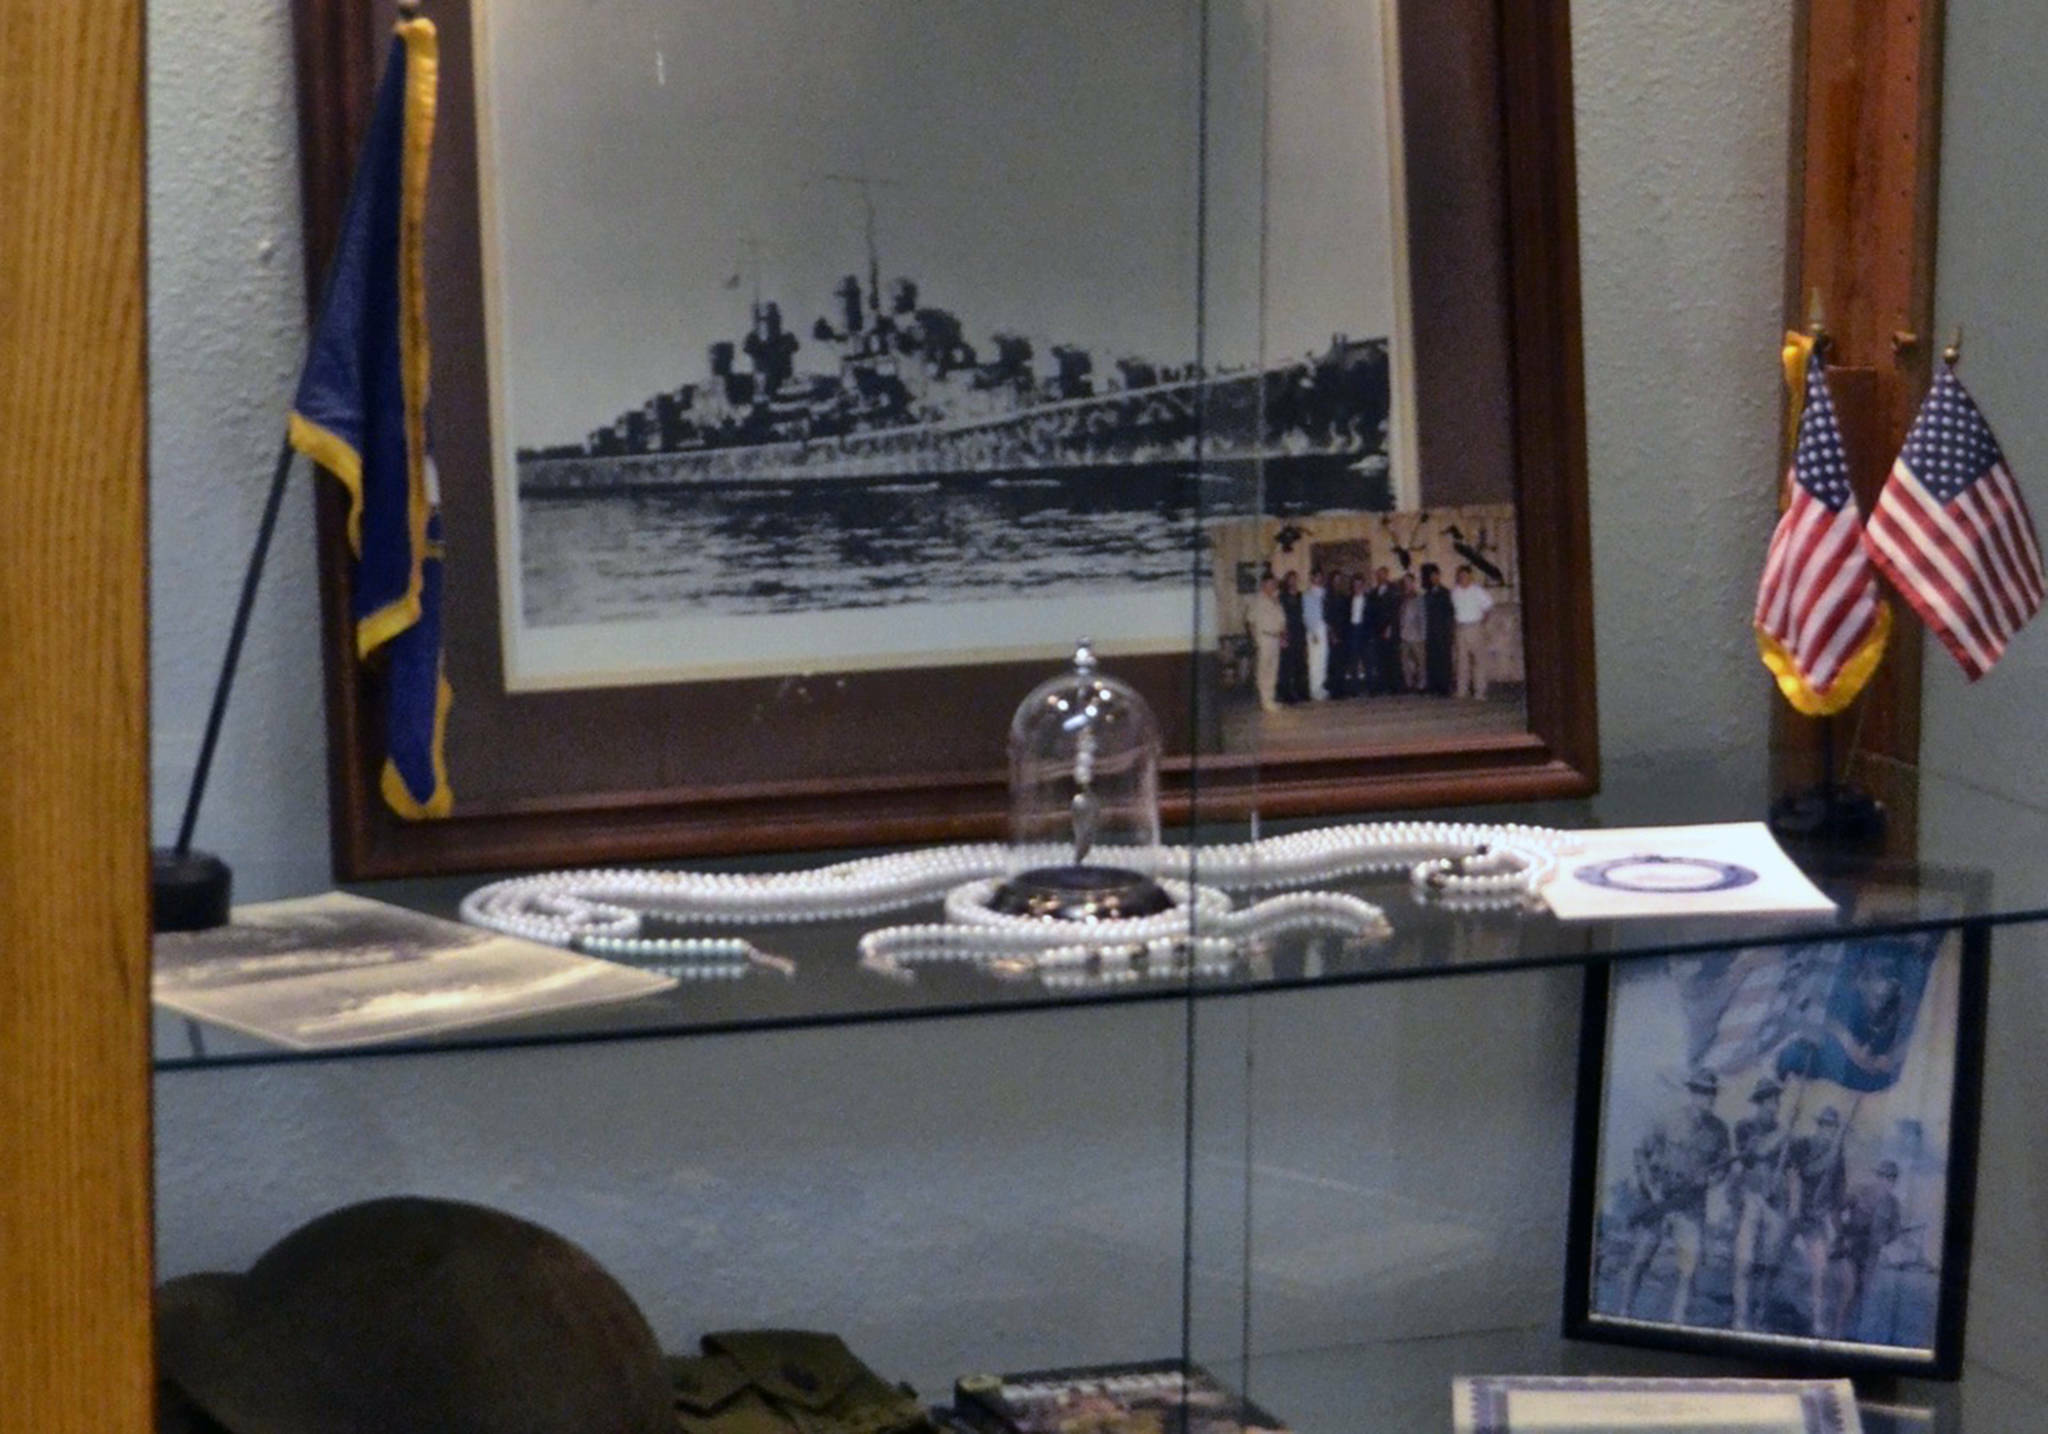 This undated photograph shows the USS Juneau memorial items that were on display at the American Legion Auke Bay Post #25 when it was burglarized in January of 2020. The long strand of beads represented those immediately killed during the torpedoing and sinking of the ship, another strand represented those who were alive and in the water, and the short strand represented those who were rescued from the water days later. The final few beads in the glass dome represented those who were still living at the time of the 75th anniversary presentation. (Courtesy photo / American Legion Auke Bay Post #25)